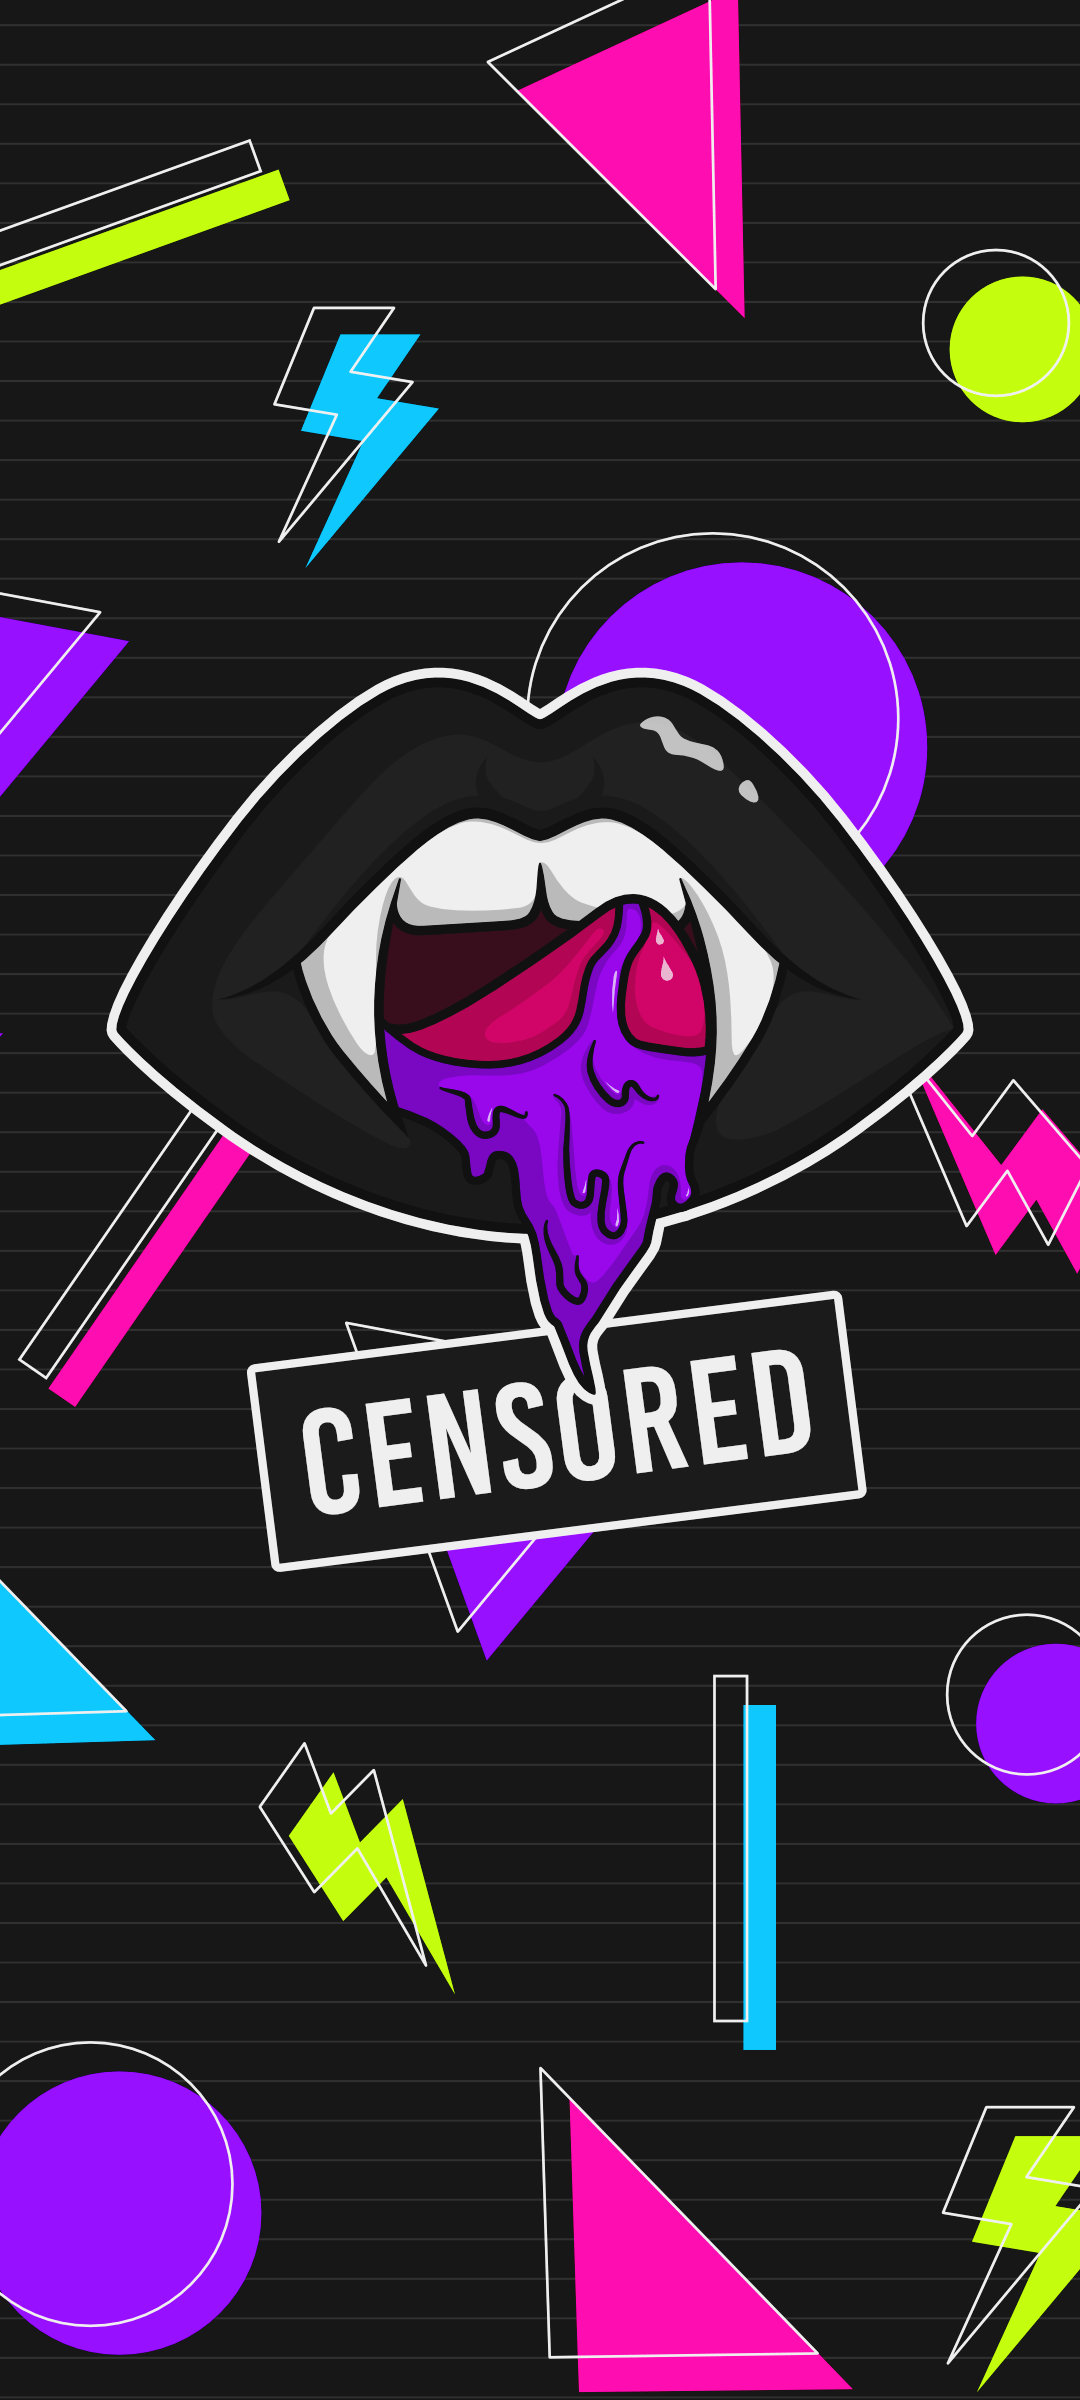 IPhone wallpaper of a mouth with a purple eye ball in it and the word censored - 80s